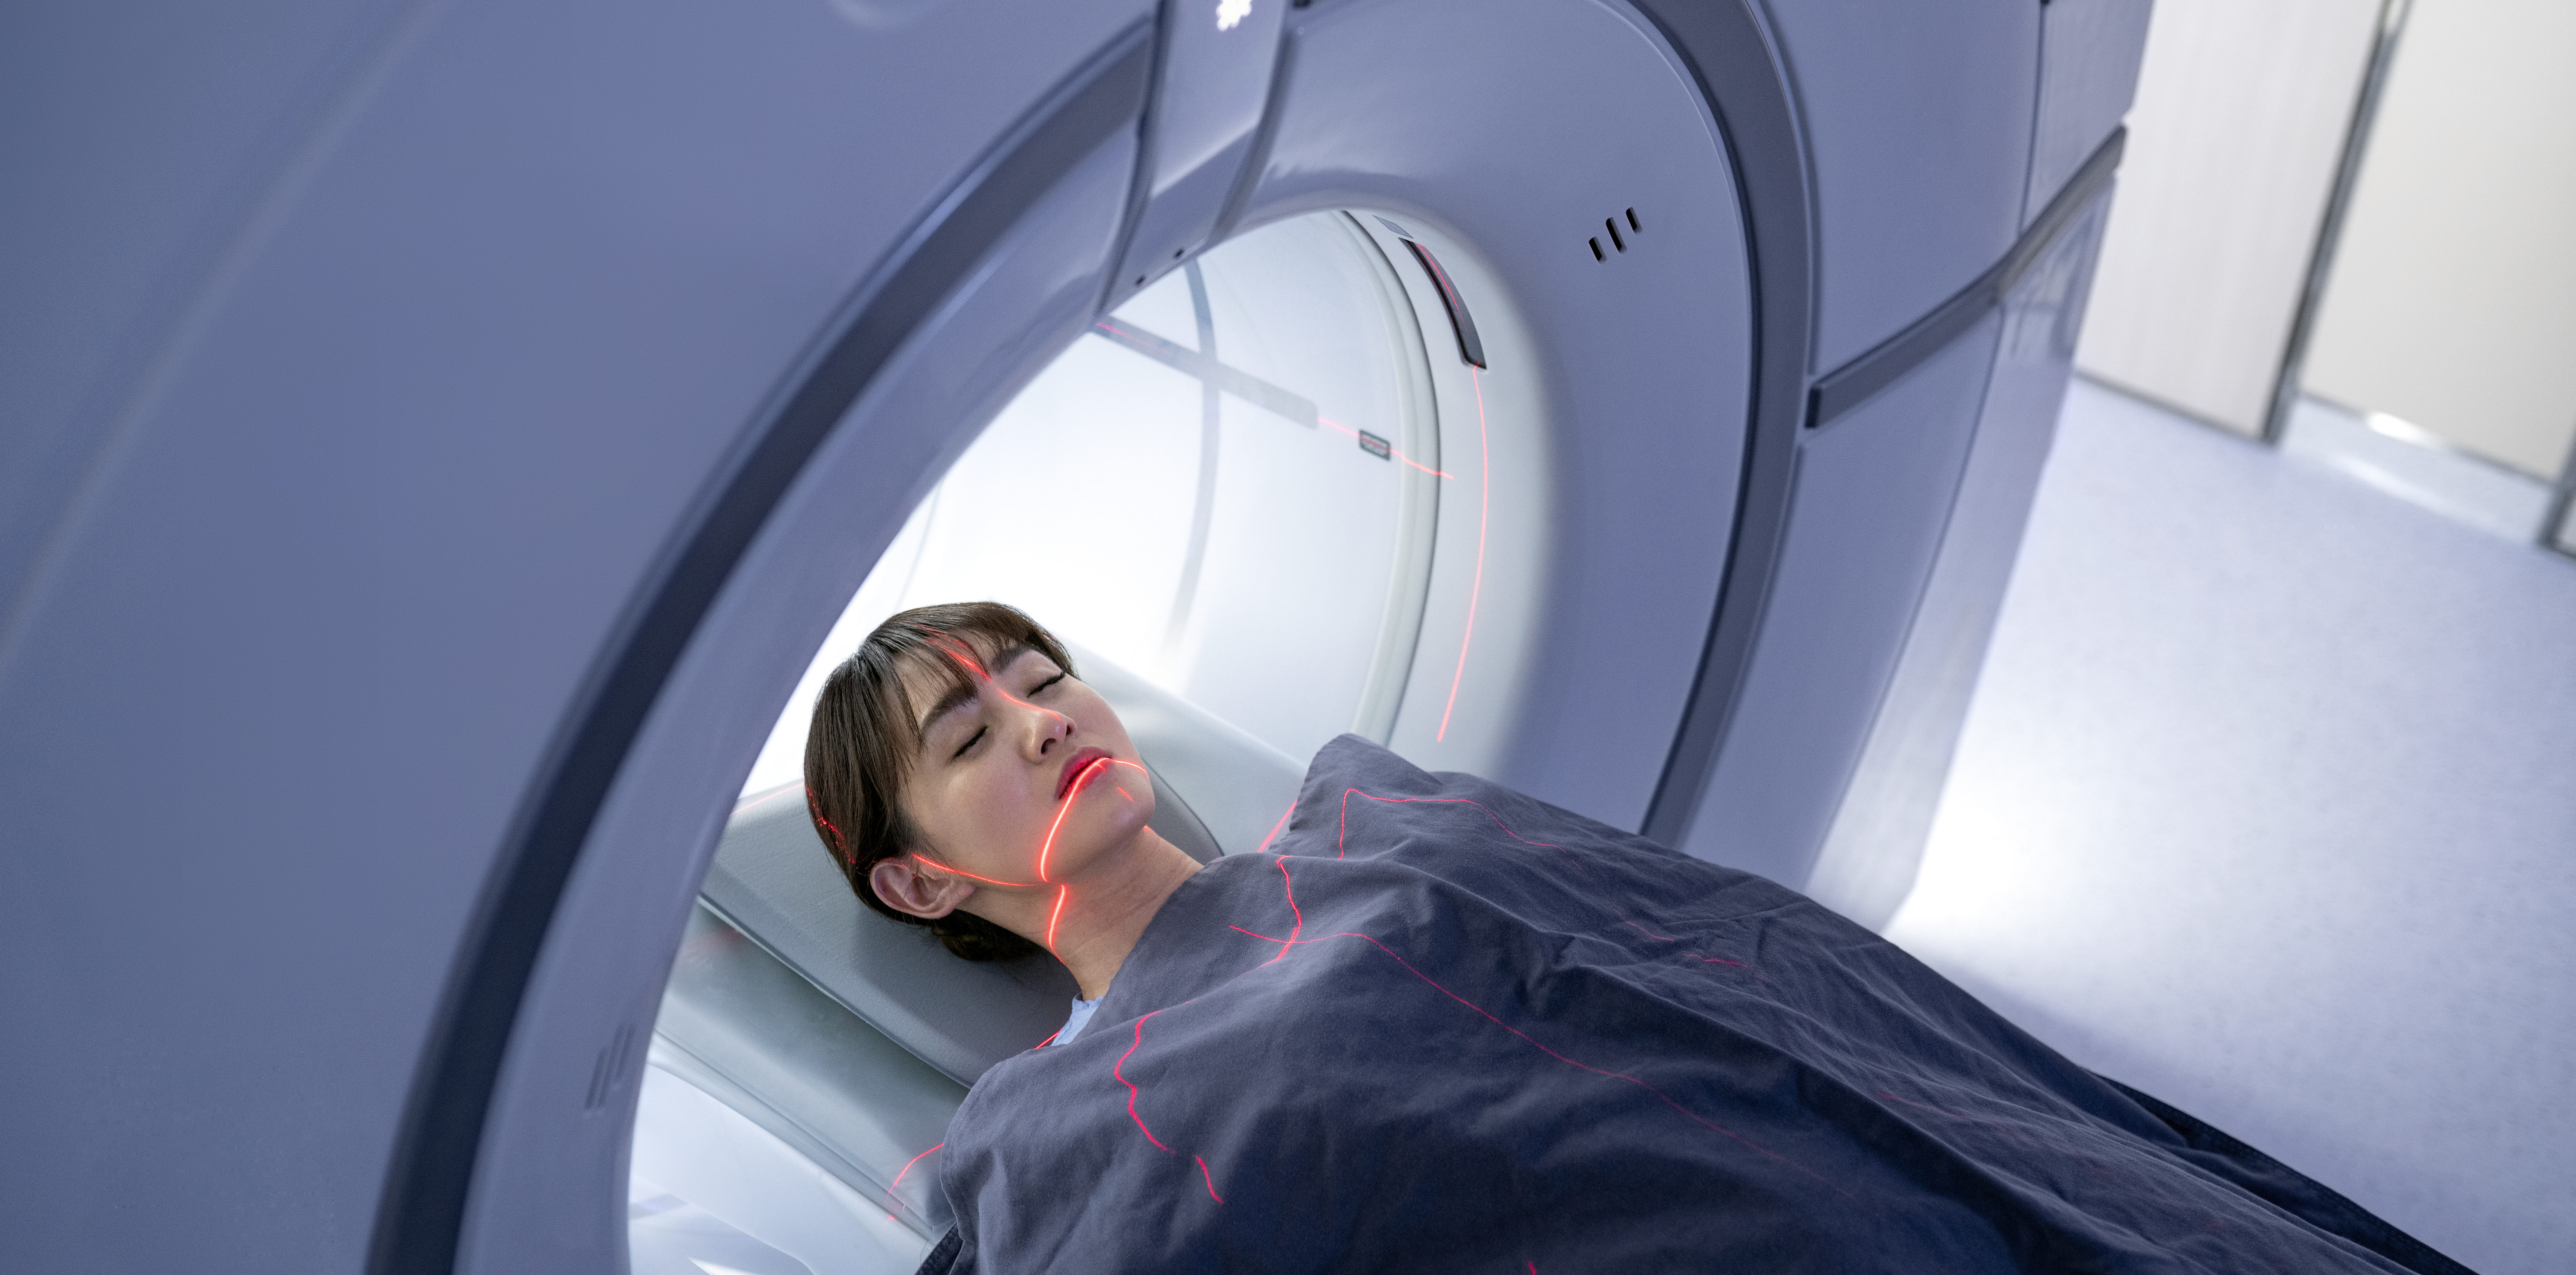 Low-Dose CT Scanning Prolongs X-Ray Tube Lifetimes